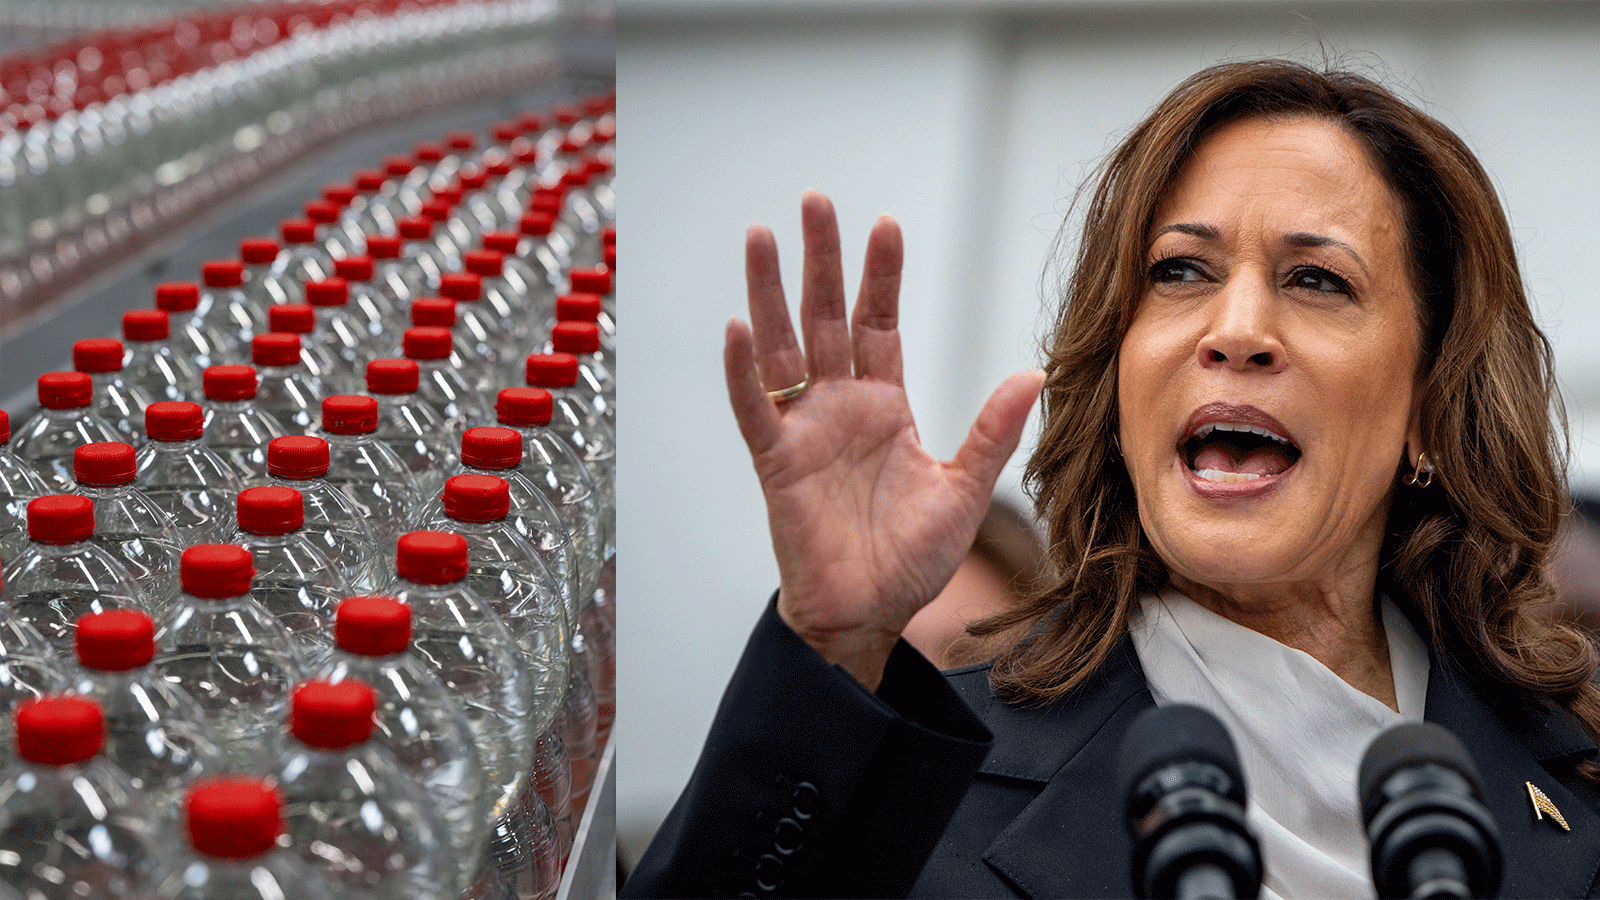 A photo of a row of plastic water bottles with red caps next to a photo of Kamala Harris raising her hand and speaking